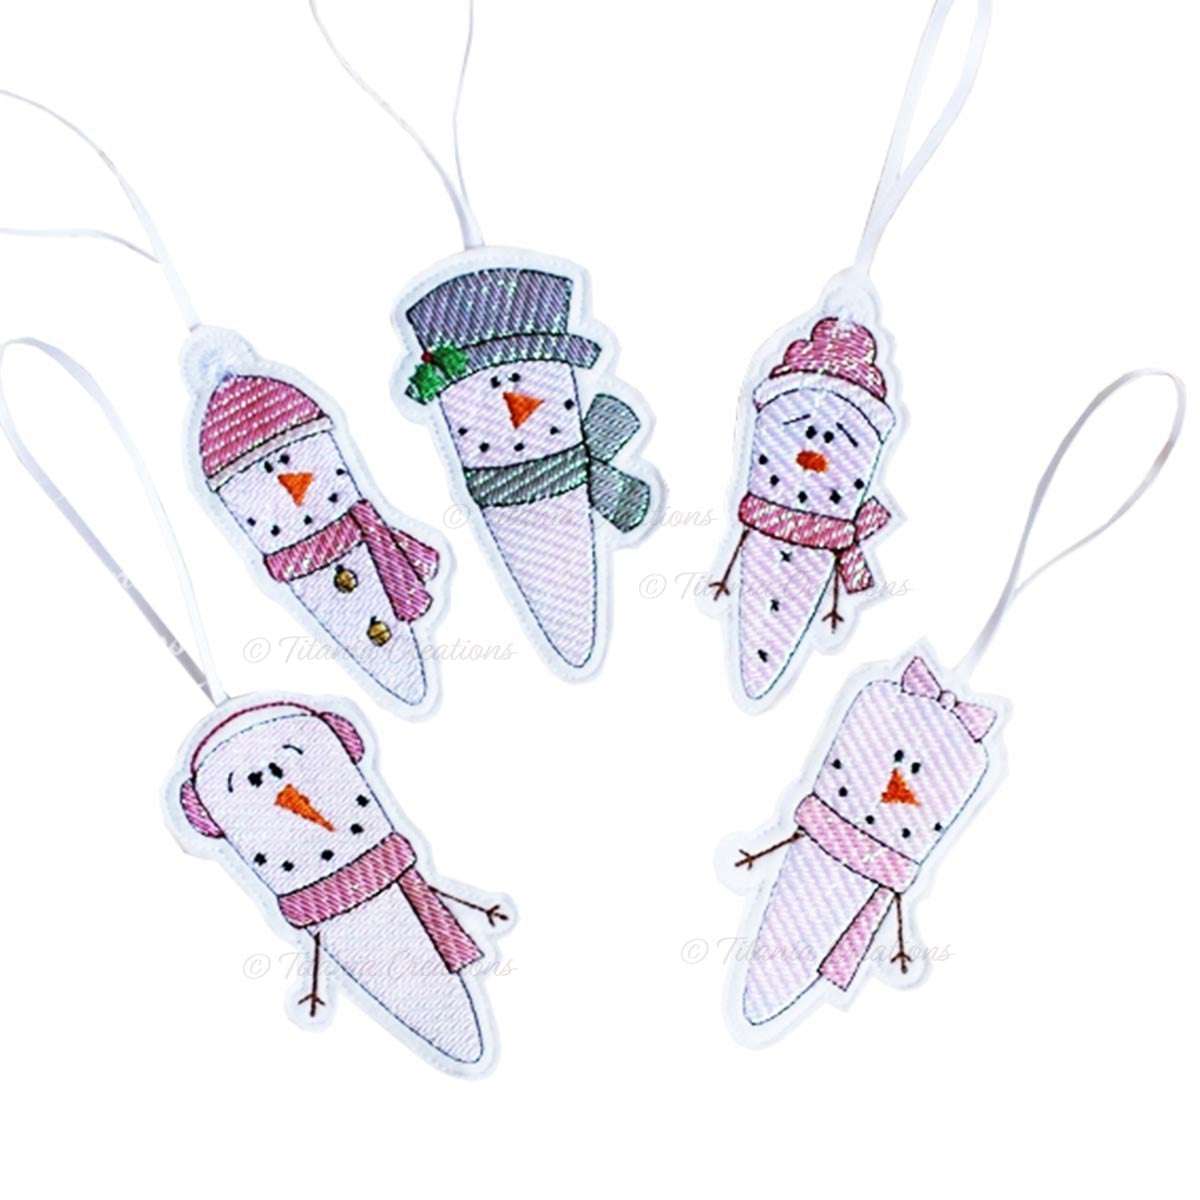 ITH Mylar Icicle Decorations set of 5 4x4